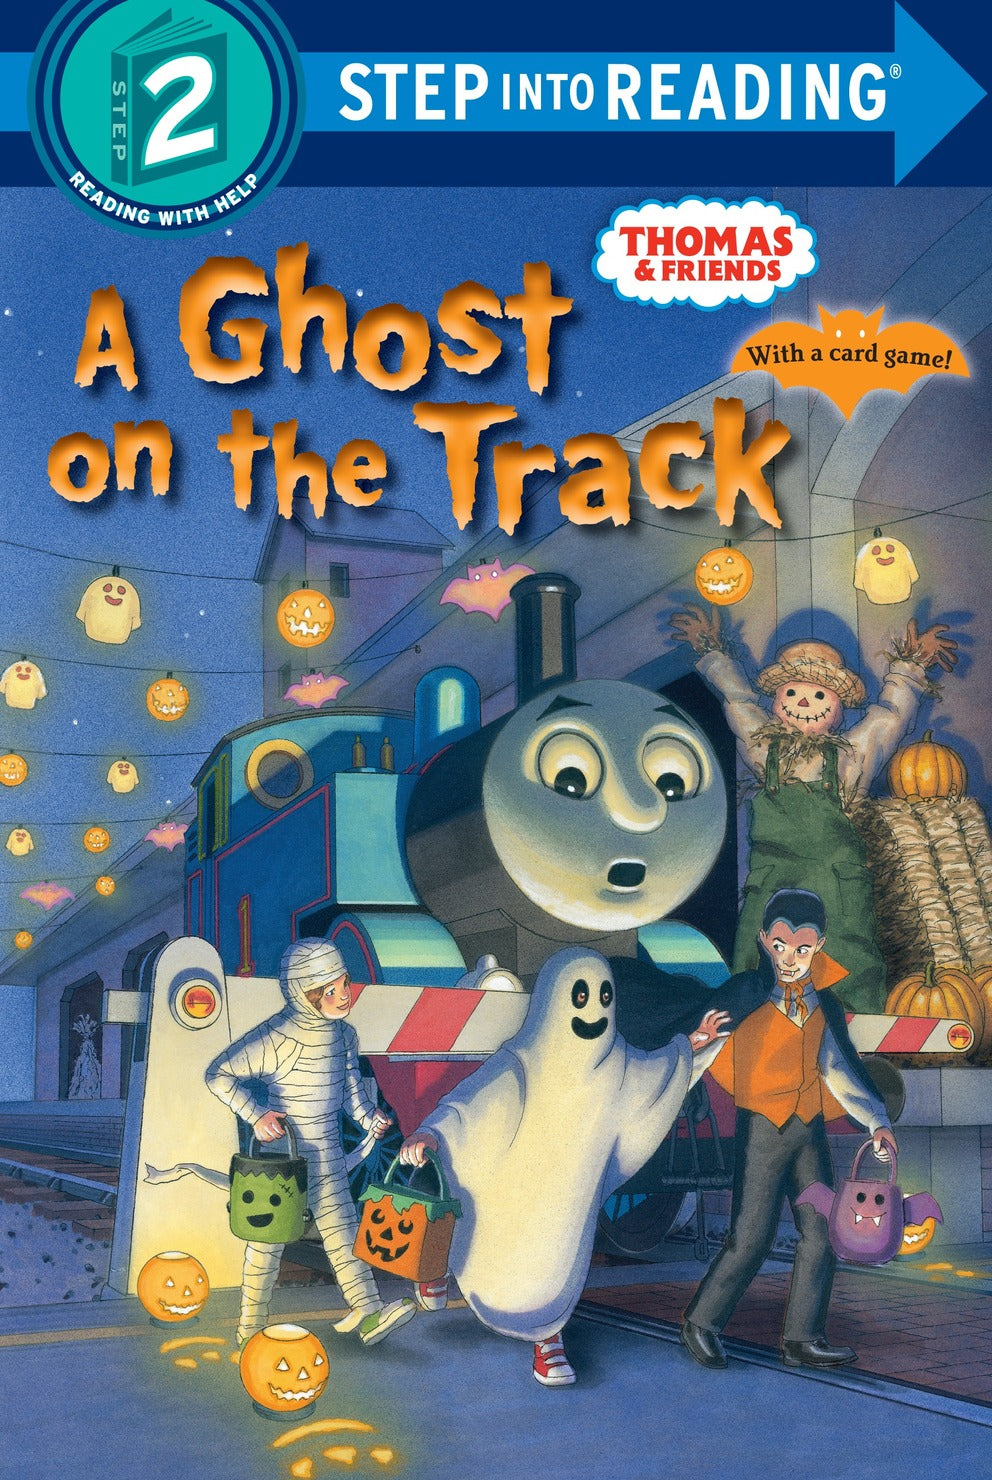 A Ghost on the Track (Thomas & Friends)